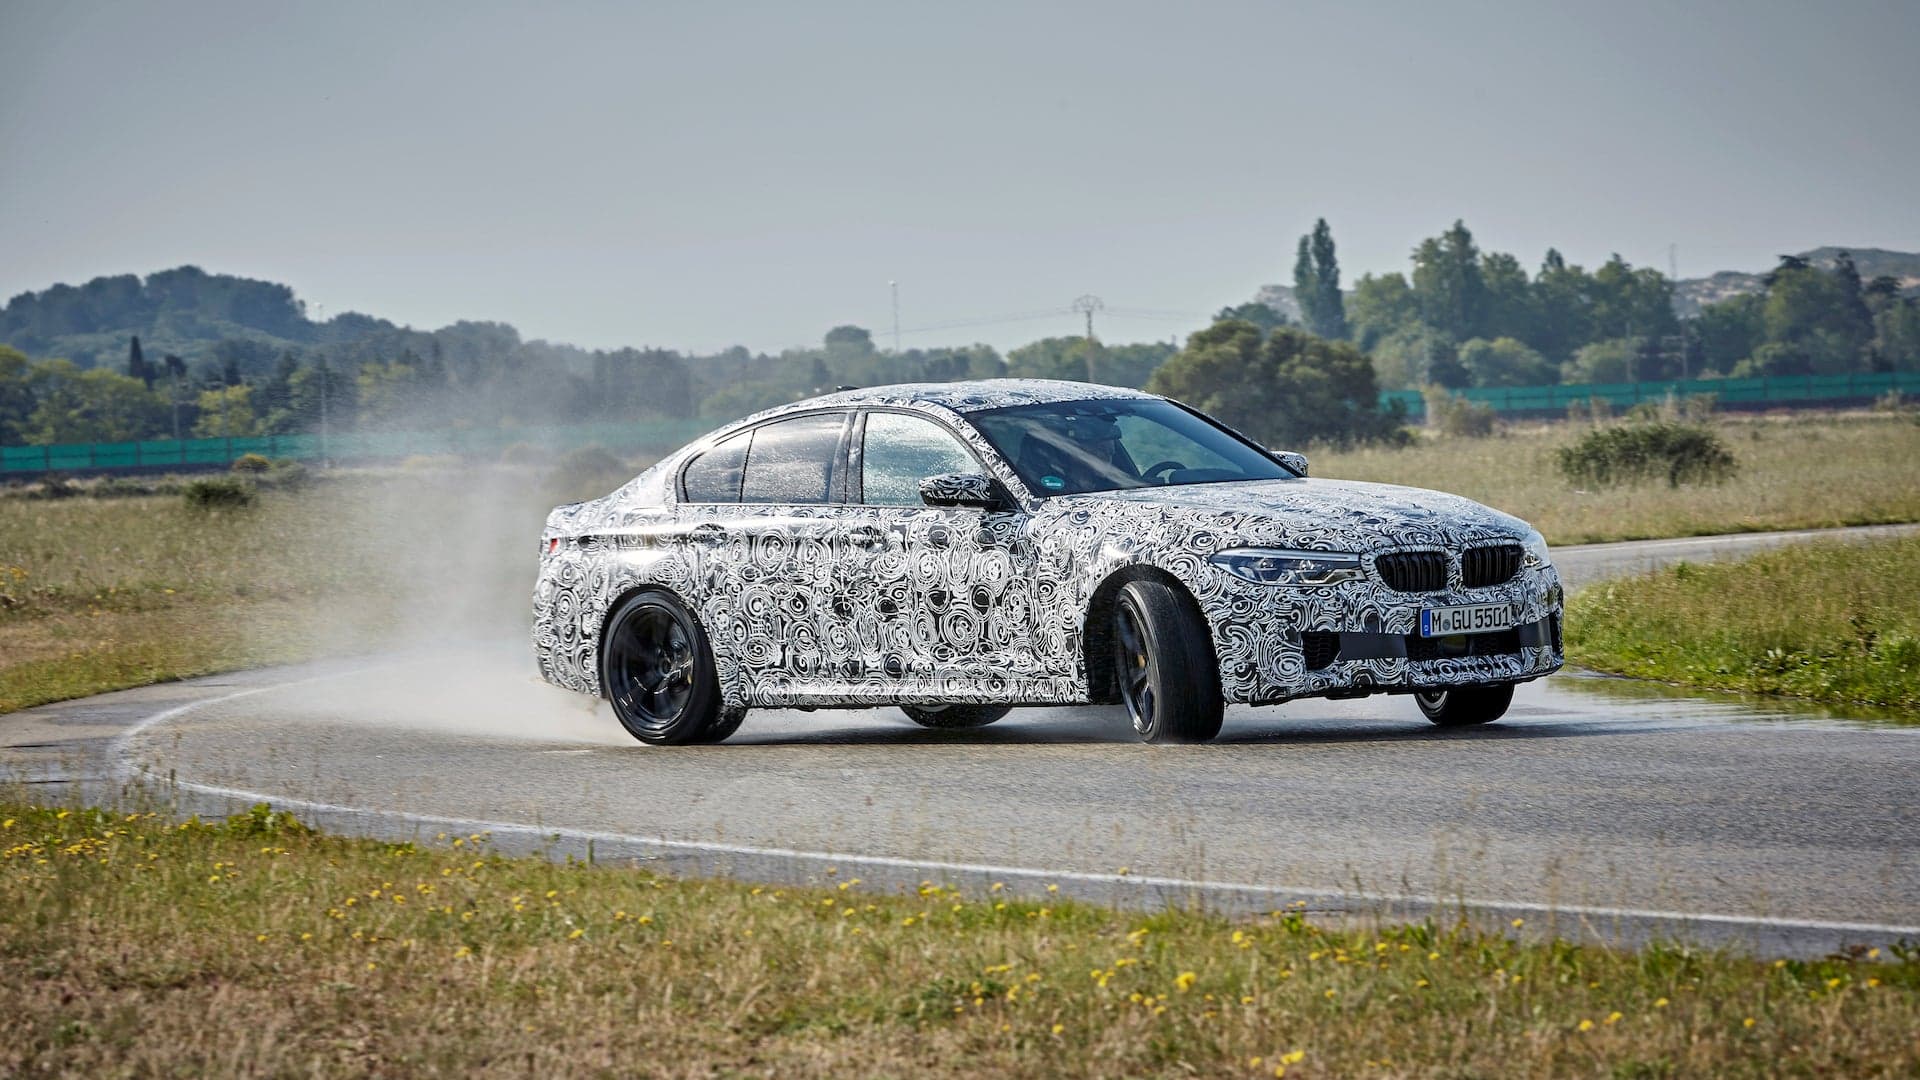 New BMW M5’s Turbocharged V8 Sends 600 HP to All Four Wheels